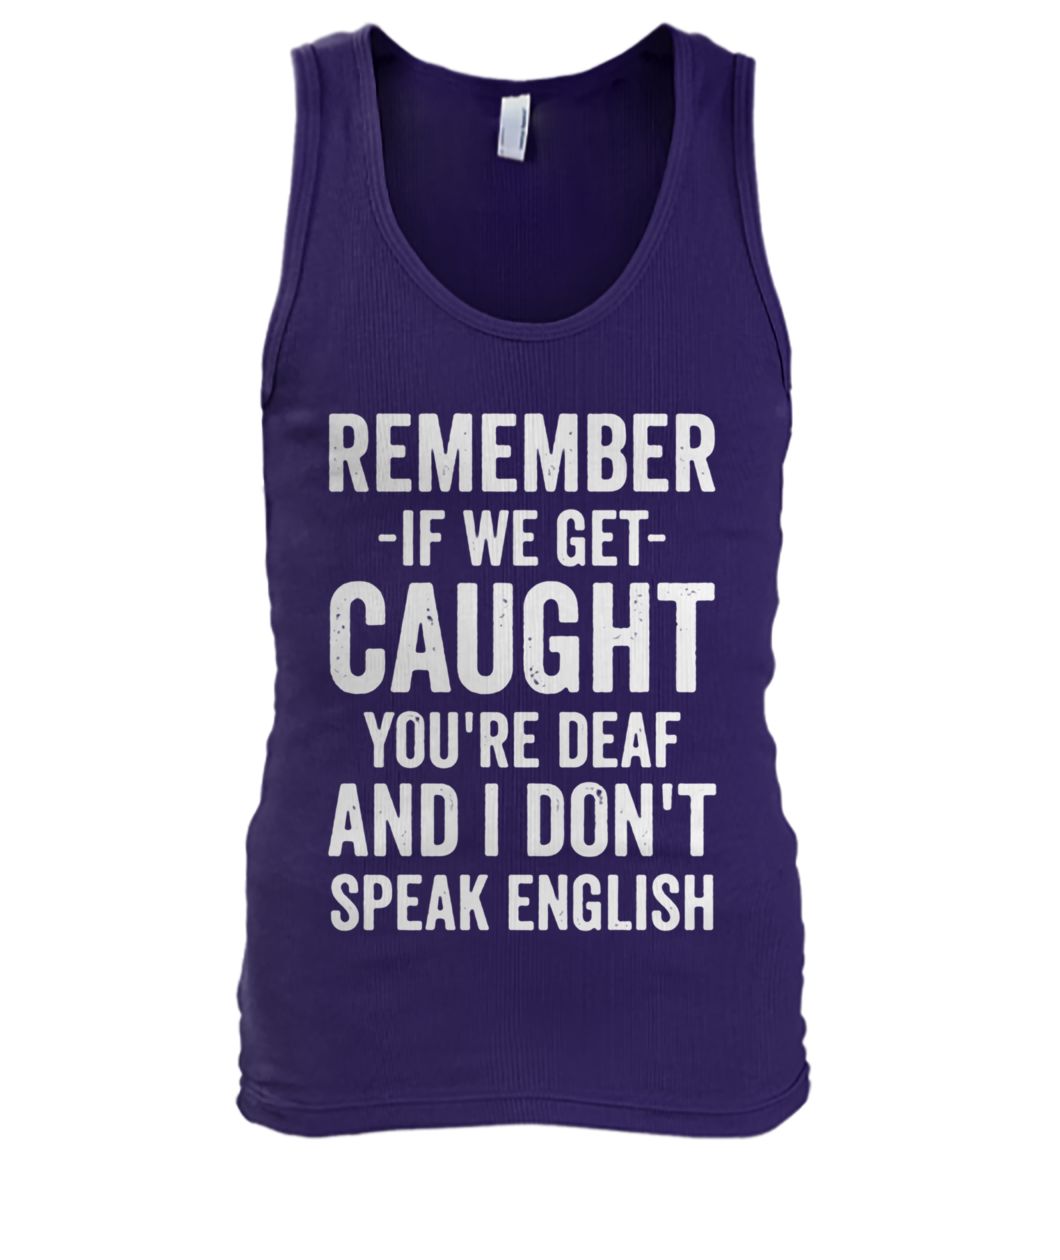 Remember if we get caught you're deaf and I don't speak english men's tank top